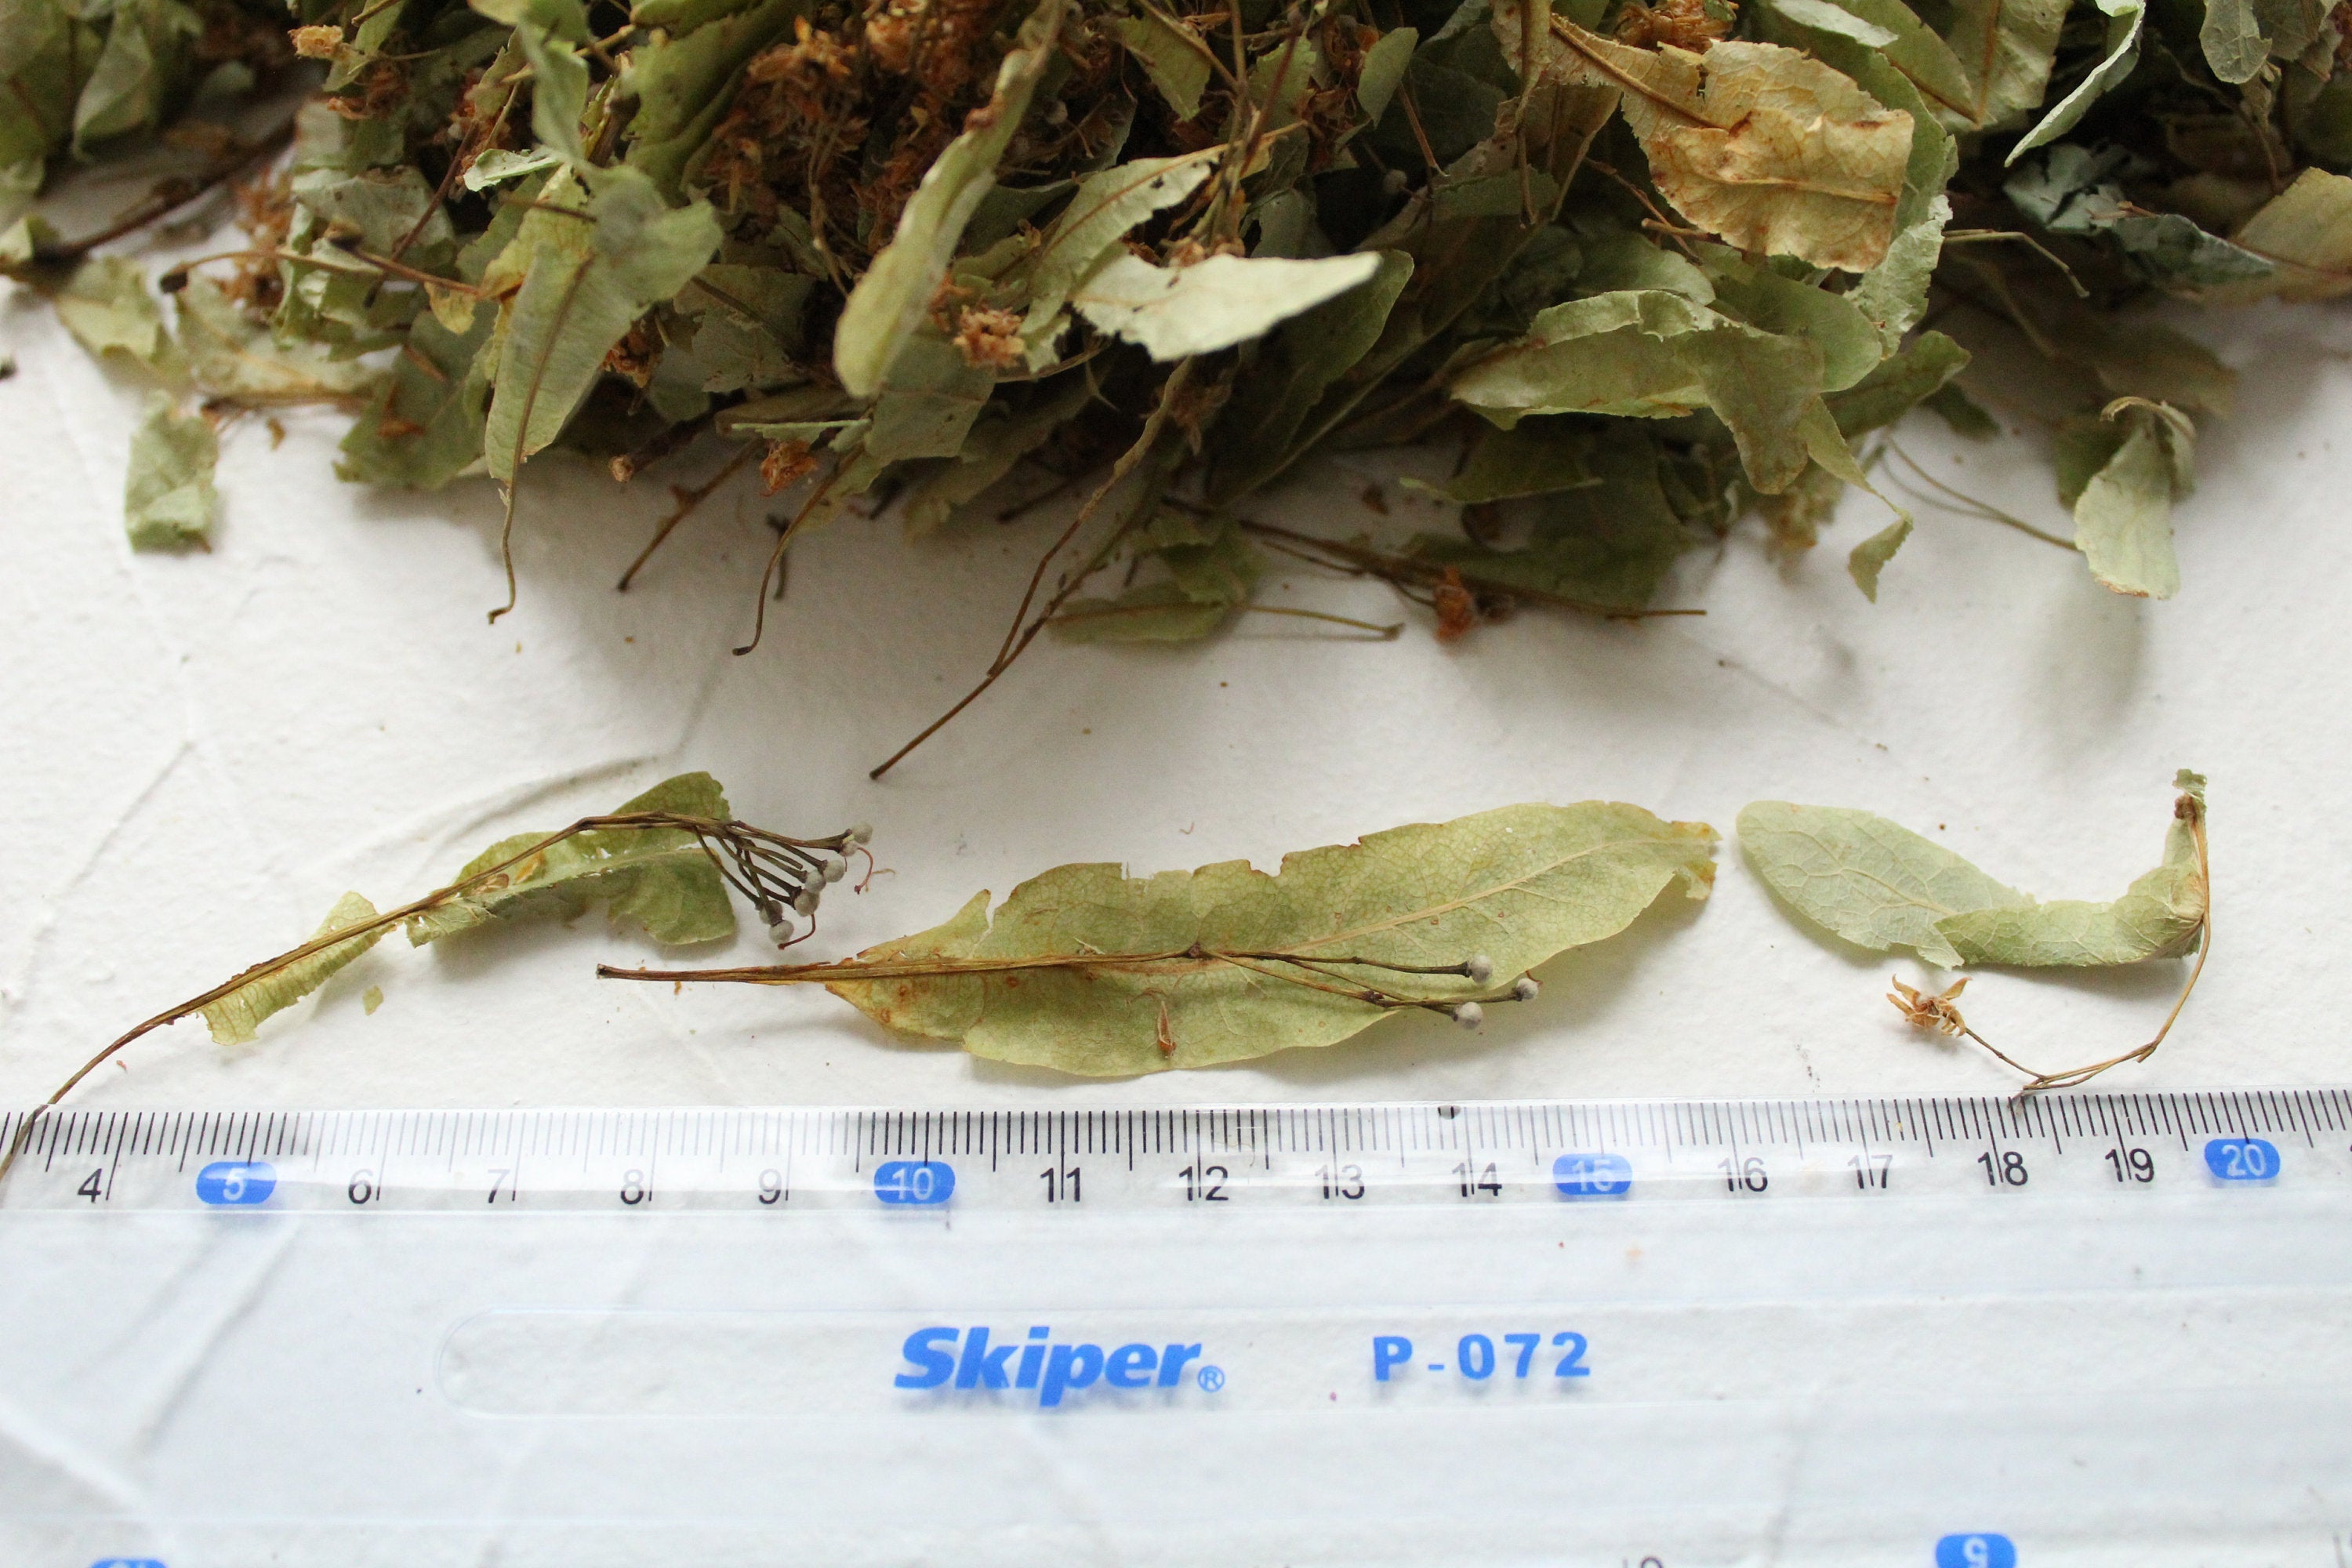 Handpicked Linden flowers, Dried, Not cut, , High Quality, Natural, Organic, Biodegraddable, Craft